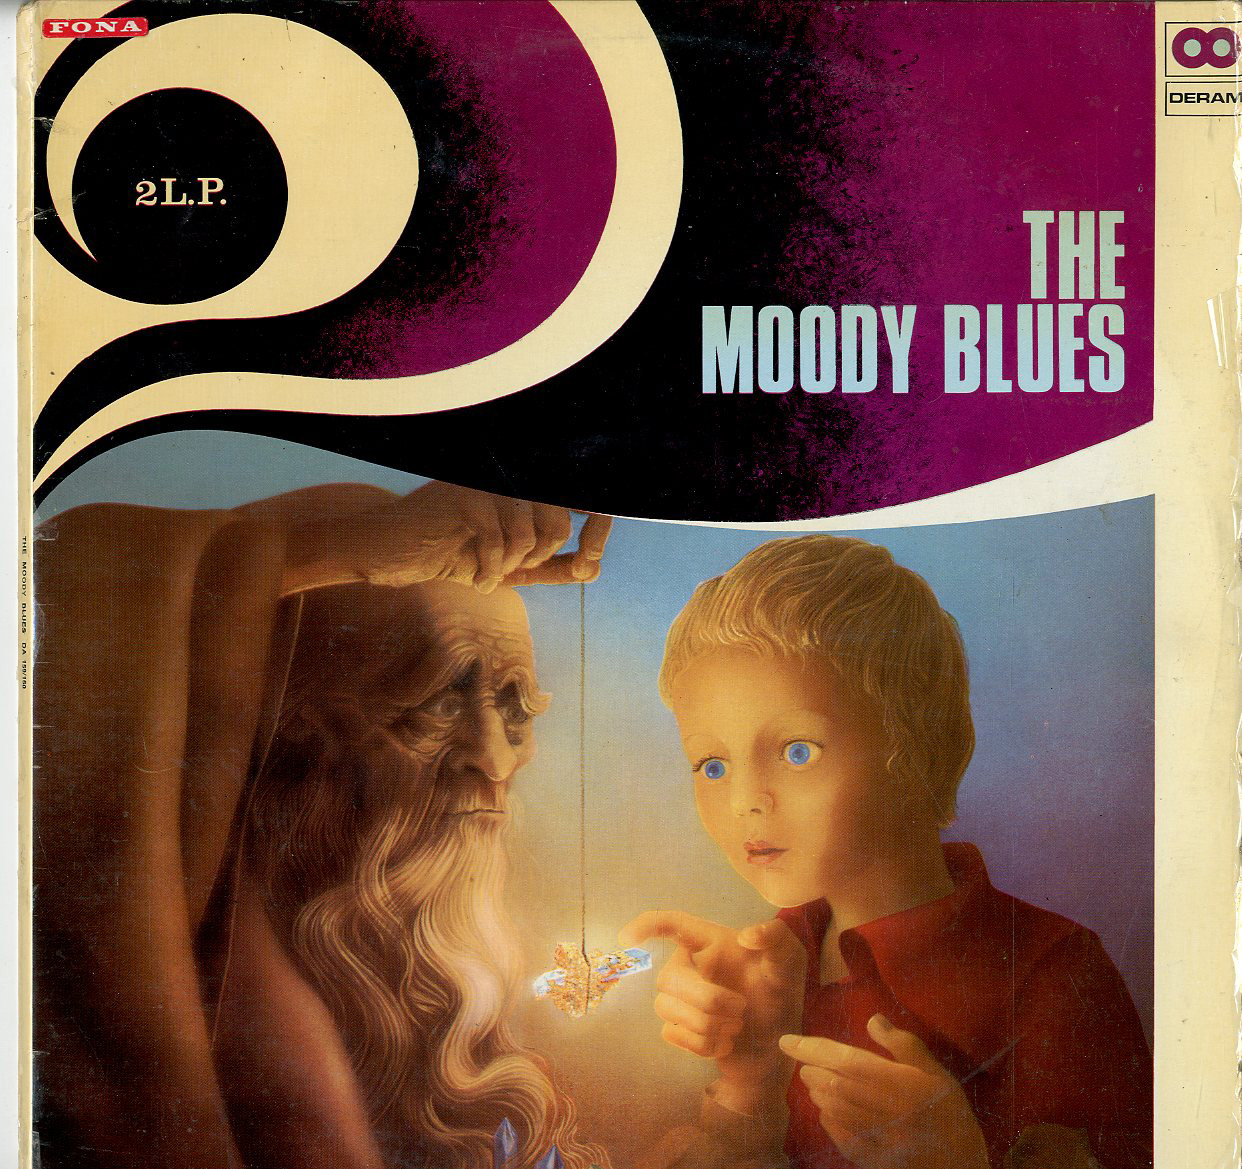 Albumcover The Moody Blues - The Moody Blues (DERAM DLP)